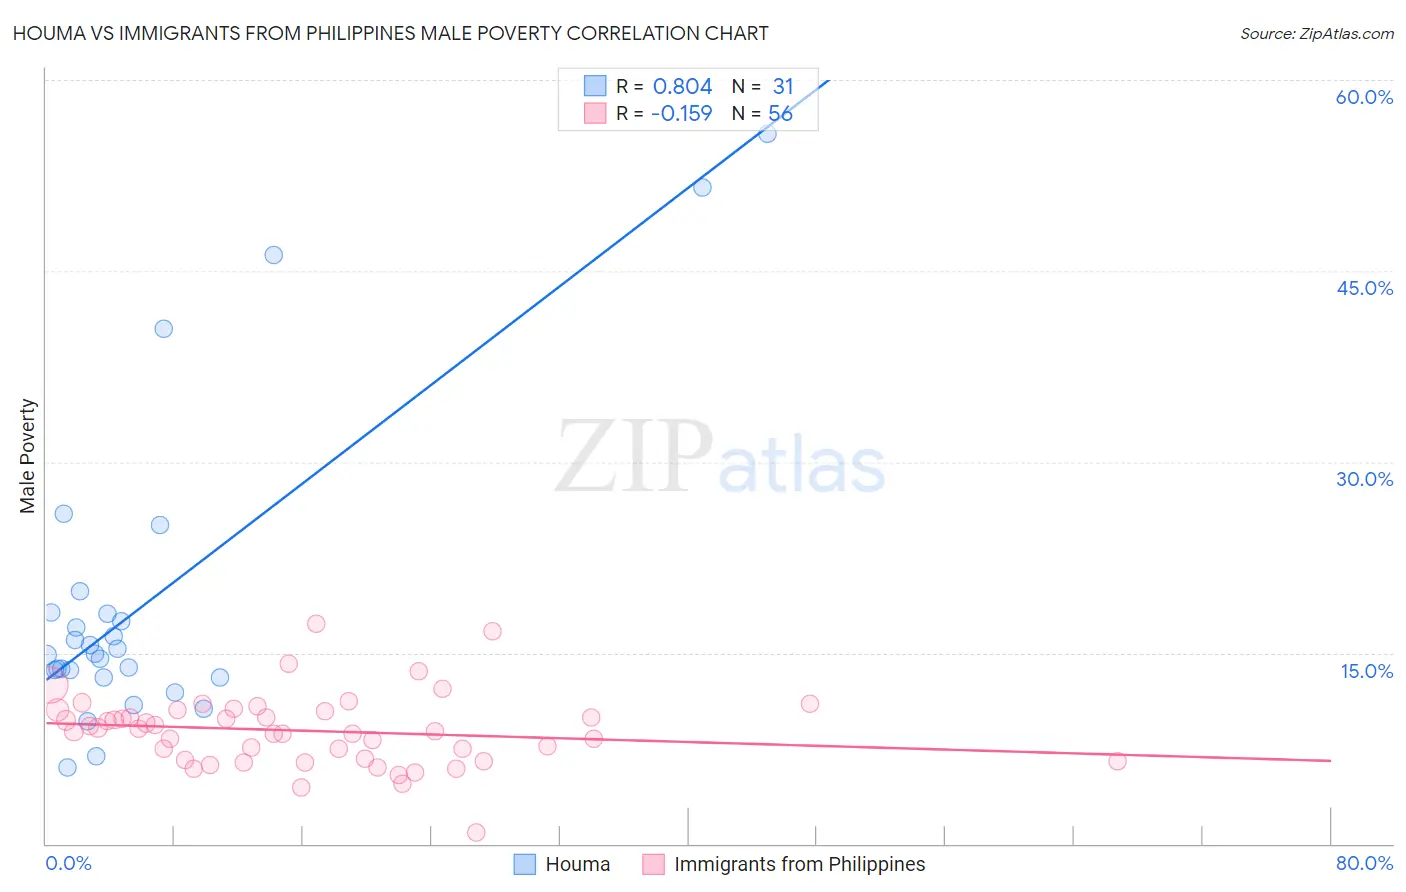 Houma vs Immigrants from Philippines Male Poverty